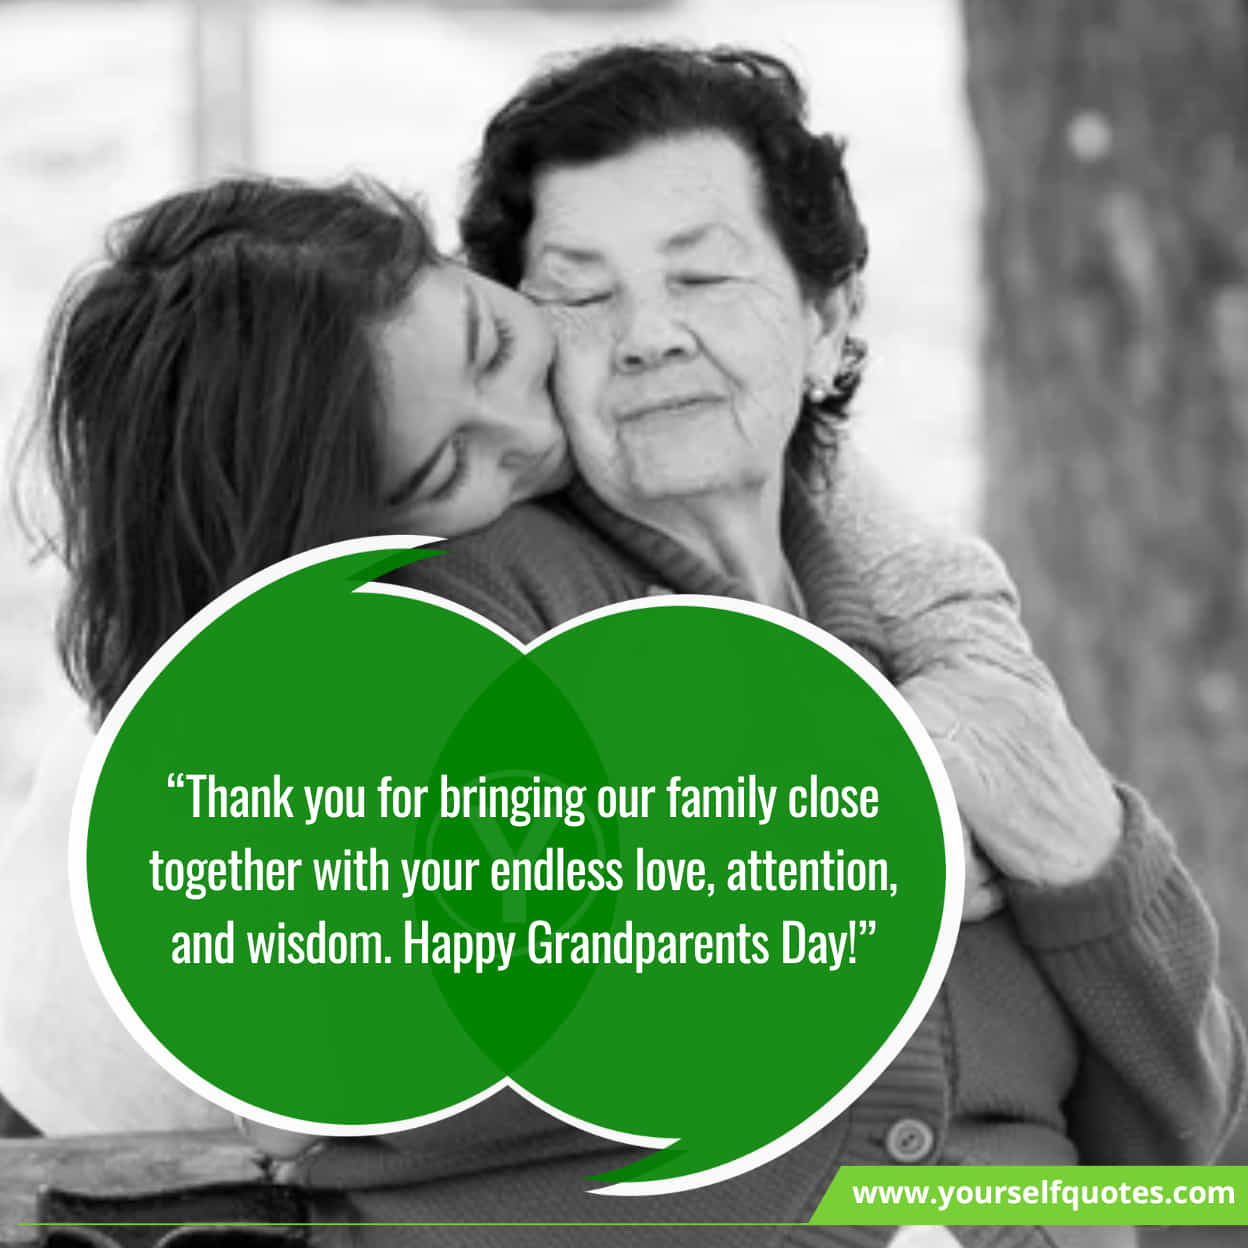 Adorable Happy Grandparents Day Wishes